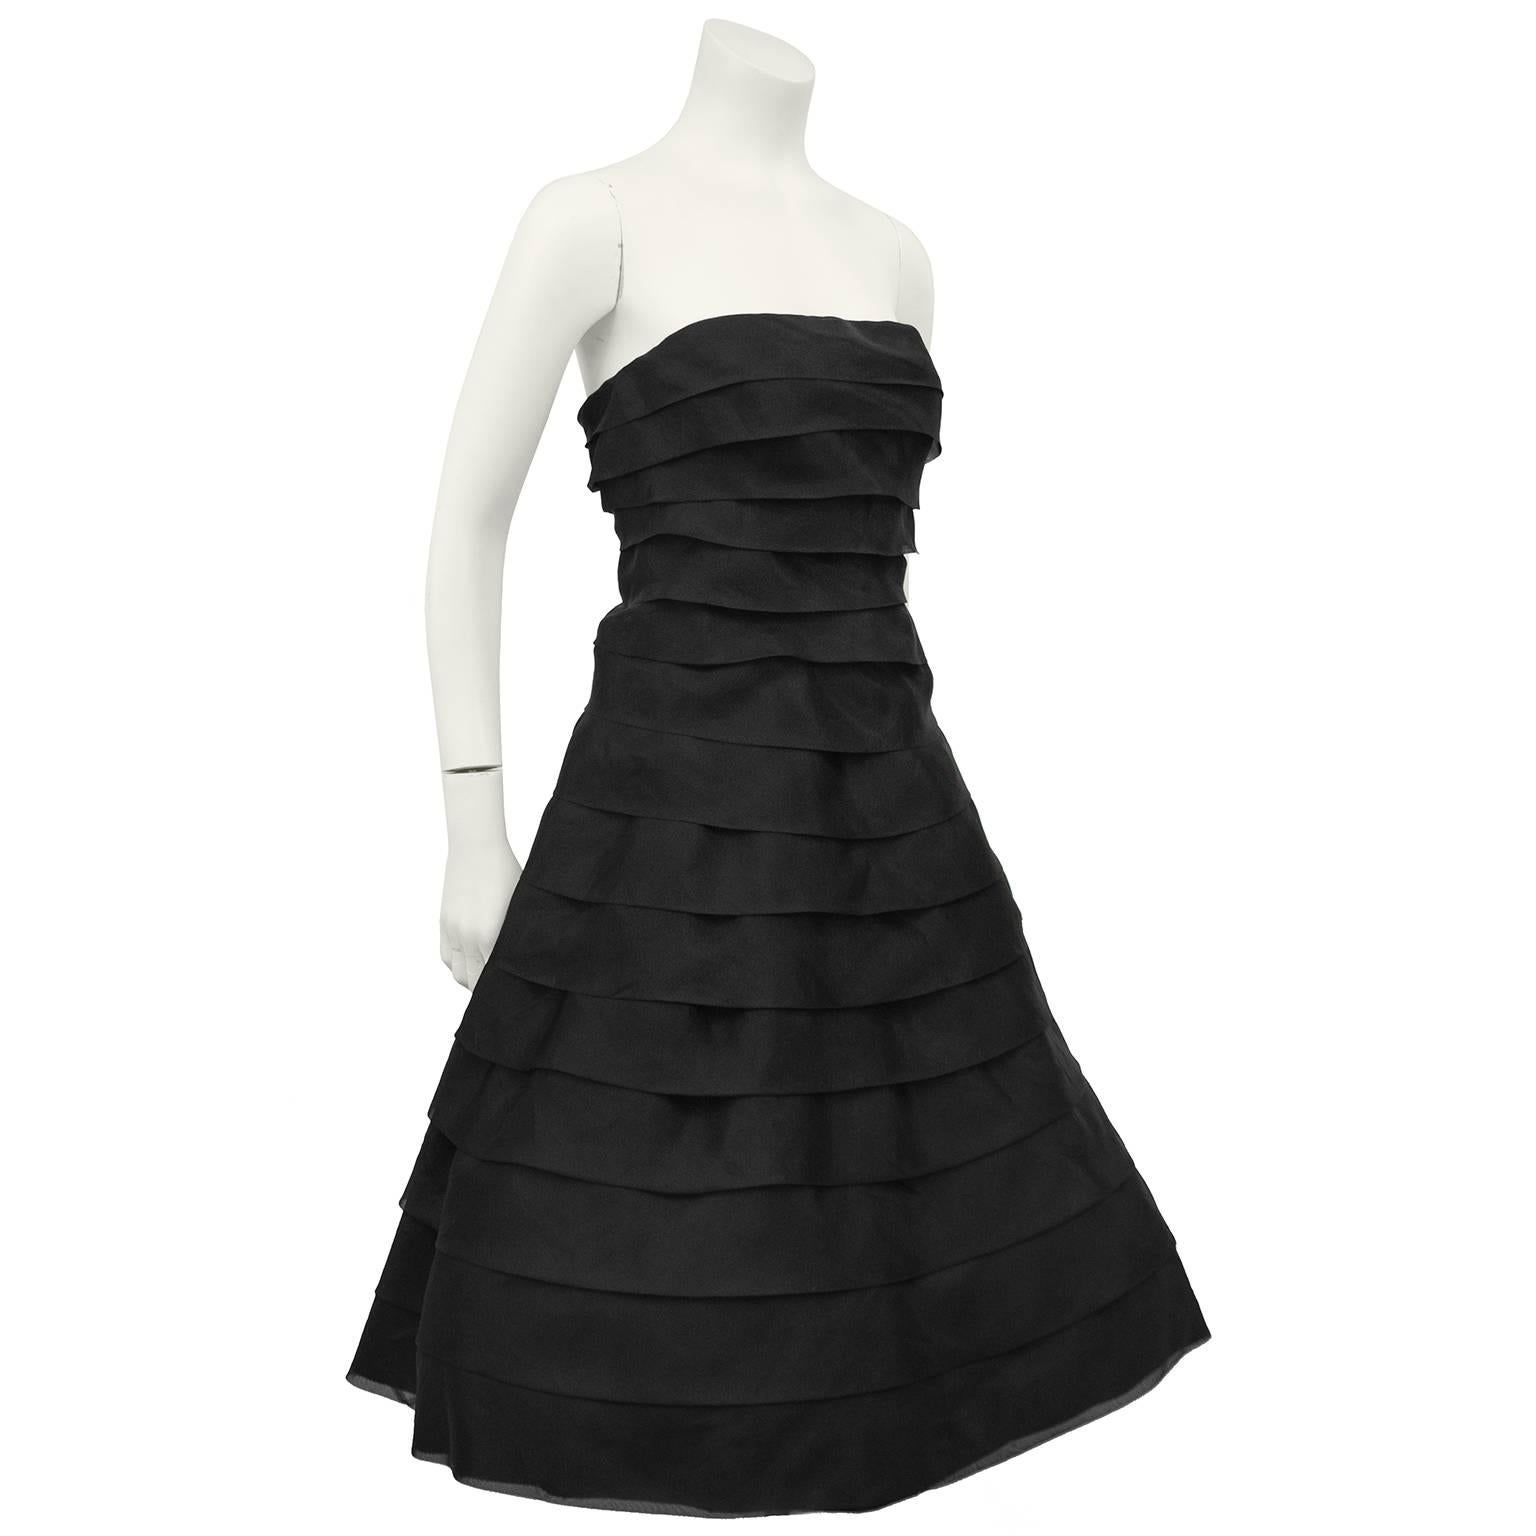 Stunning 1980s Victor Costa black strapless cocktail dress. Tiers of folded chiffon with a silver reflect throughout that catches the light beautifully. Boned bodice, with a-line tea length skirt with a linen underskirt with ruched black taffeta at